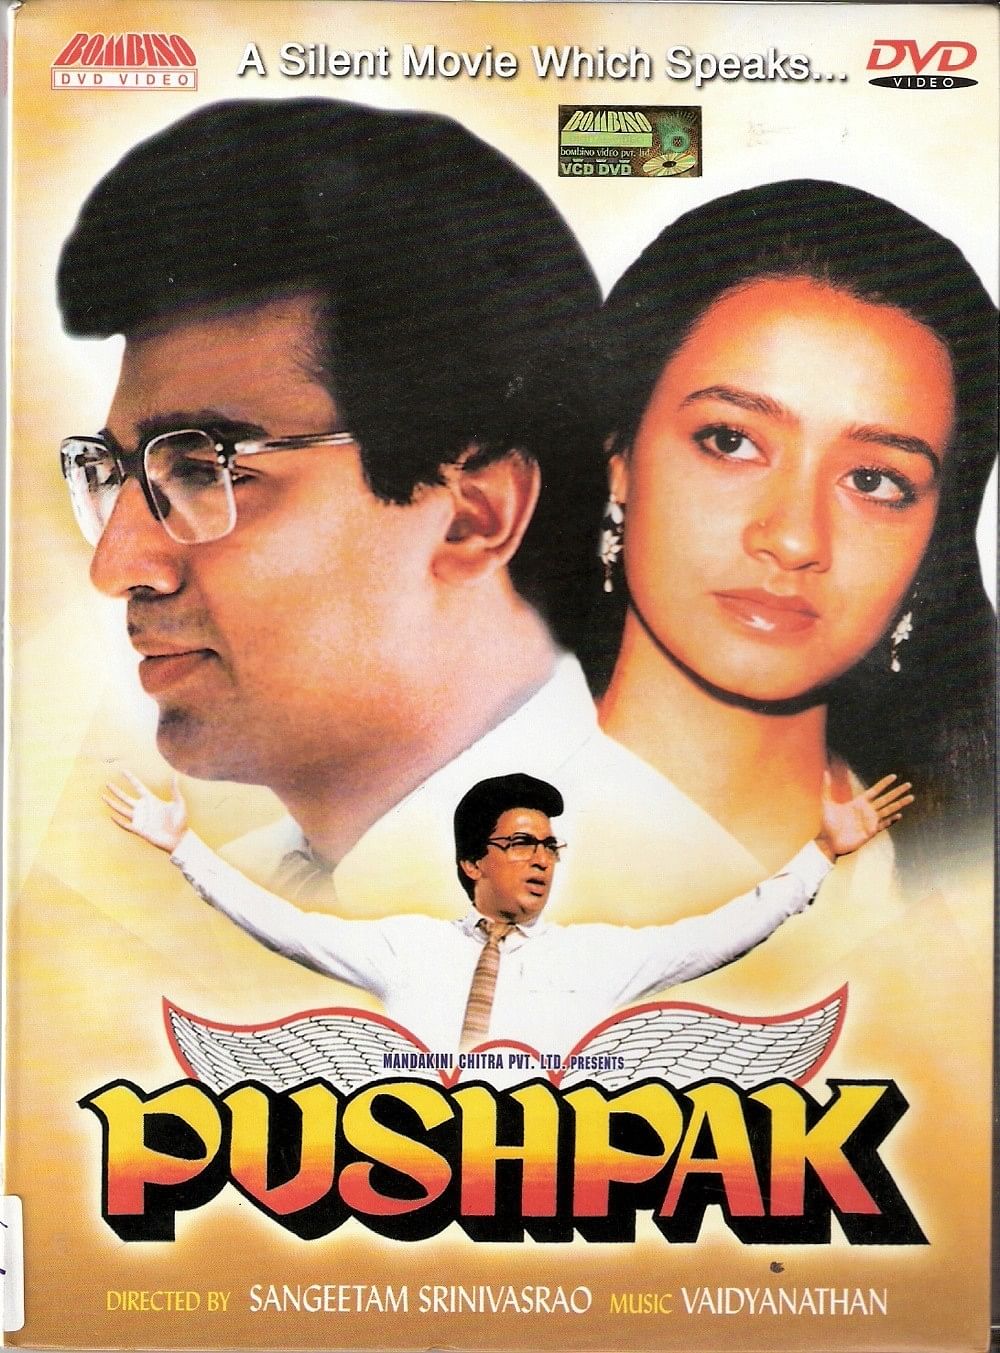 Watching a silent movie in 2017? Here’s a review of Kamal Haasan’s ‘Pushpak’ to explain how does it feel like.